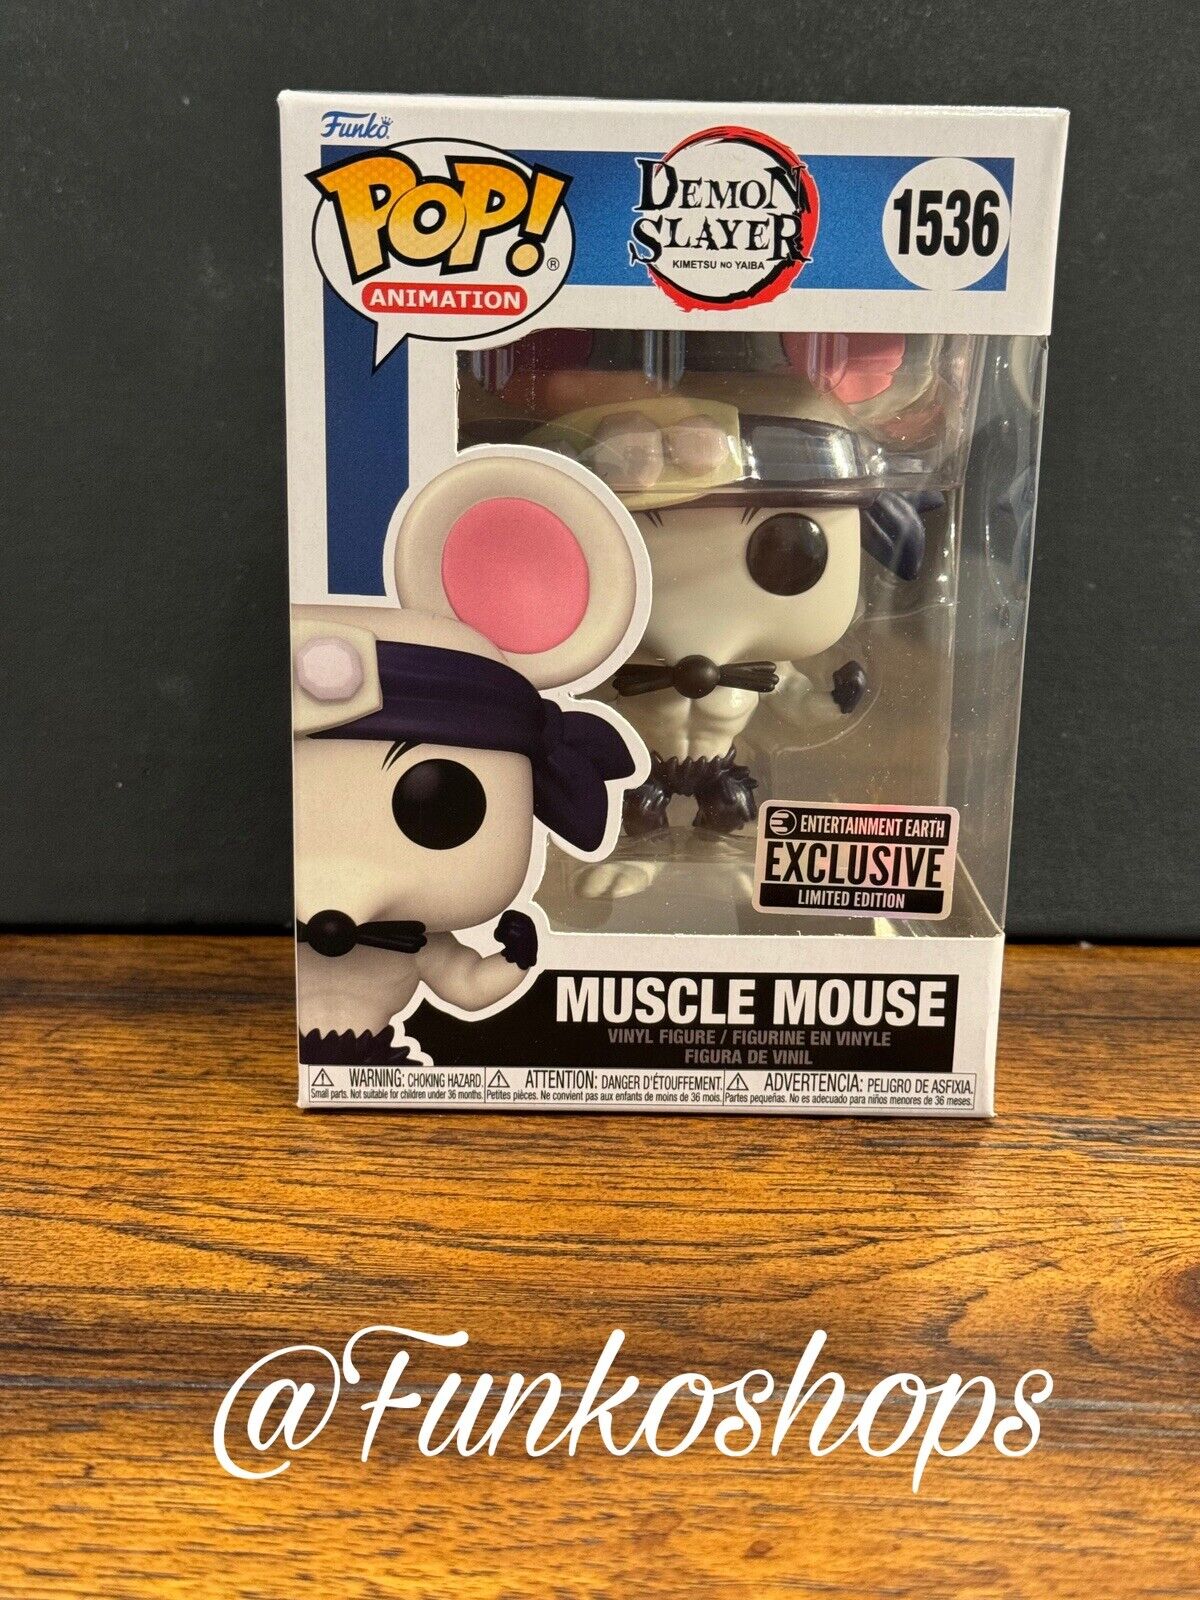 * NEW* Funko Pop Demon Slayer Muscle Mouse Vinyl Figure #1536 - Ships Today